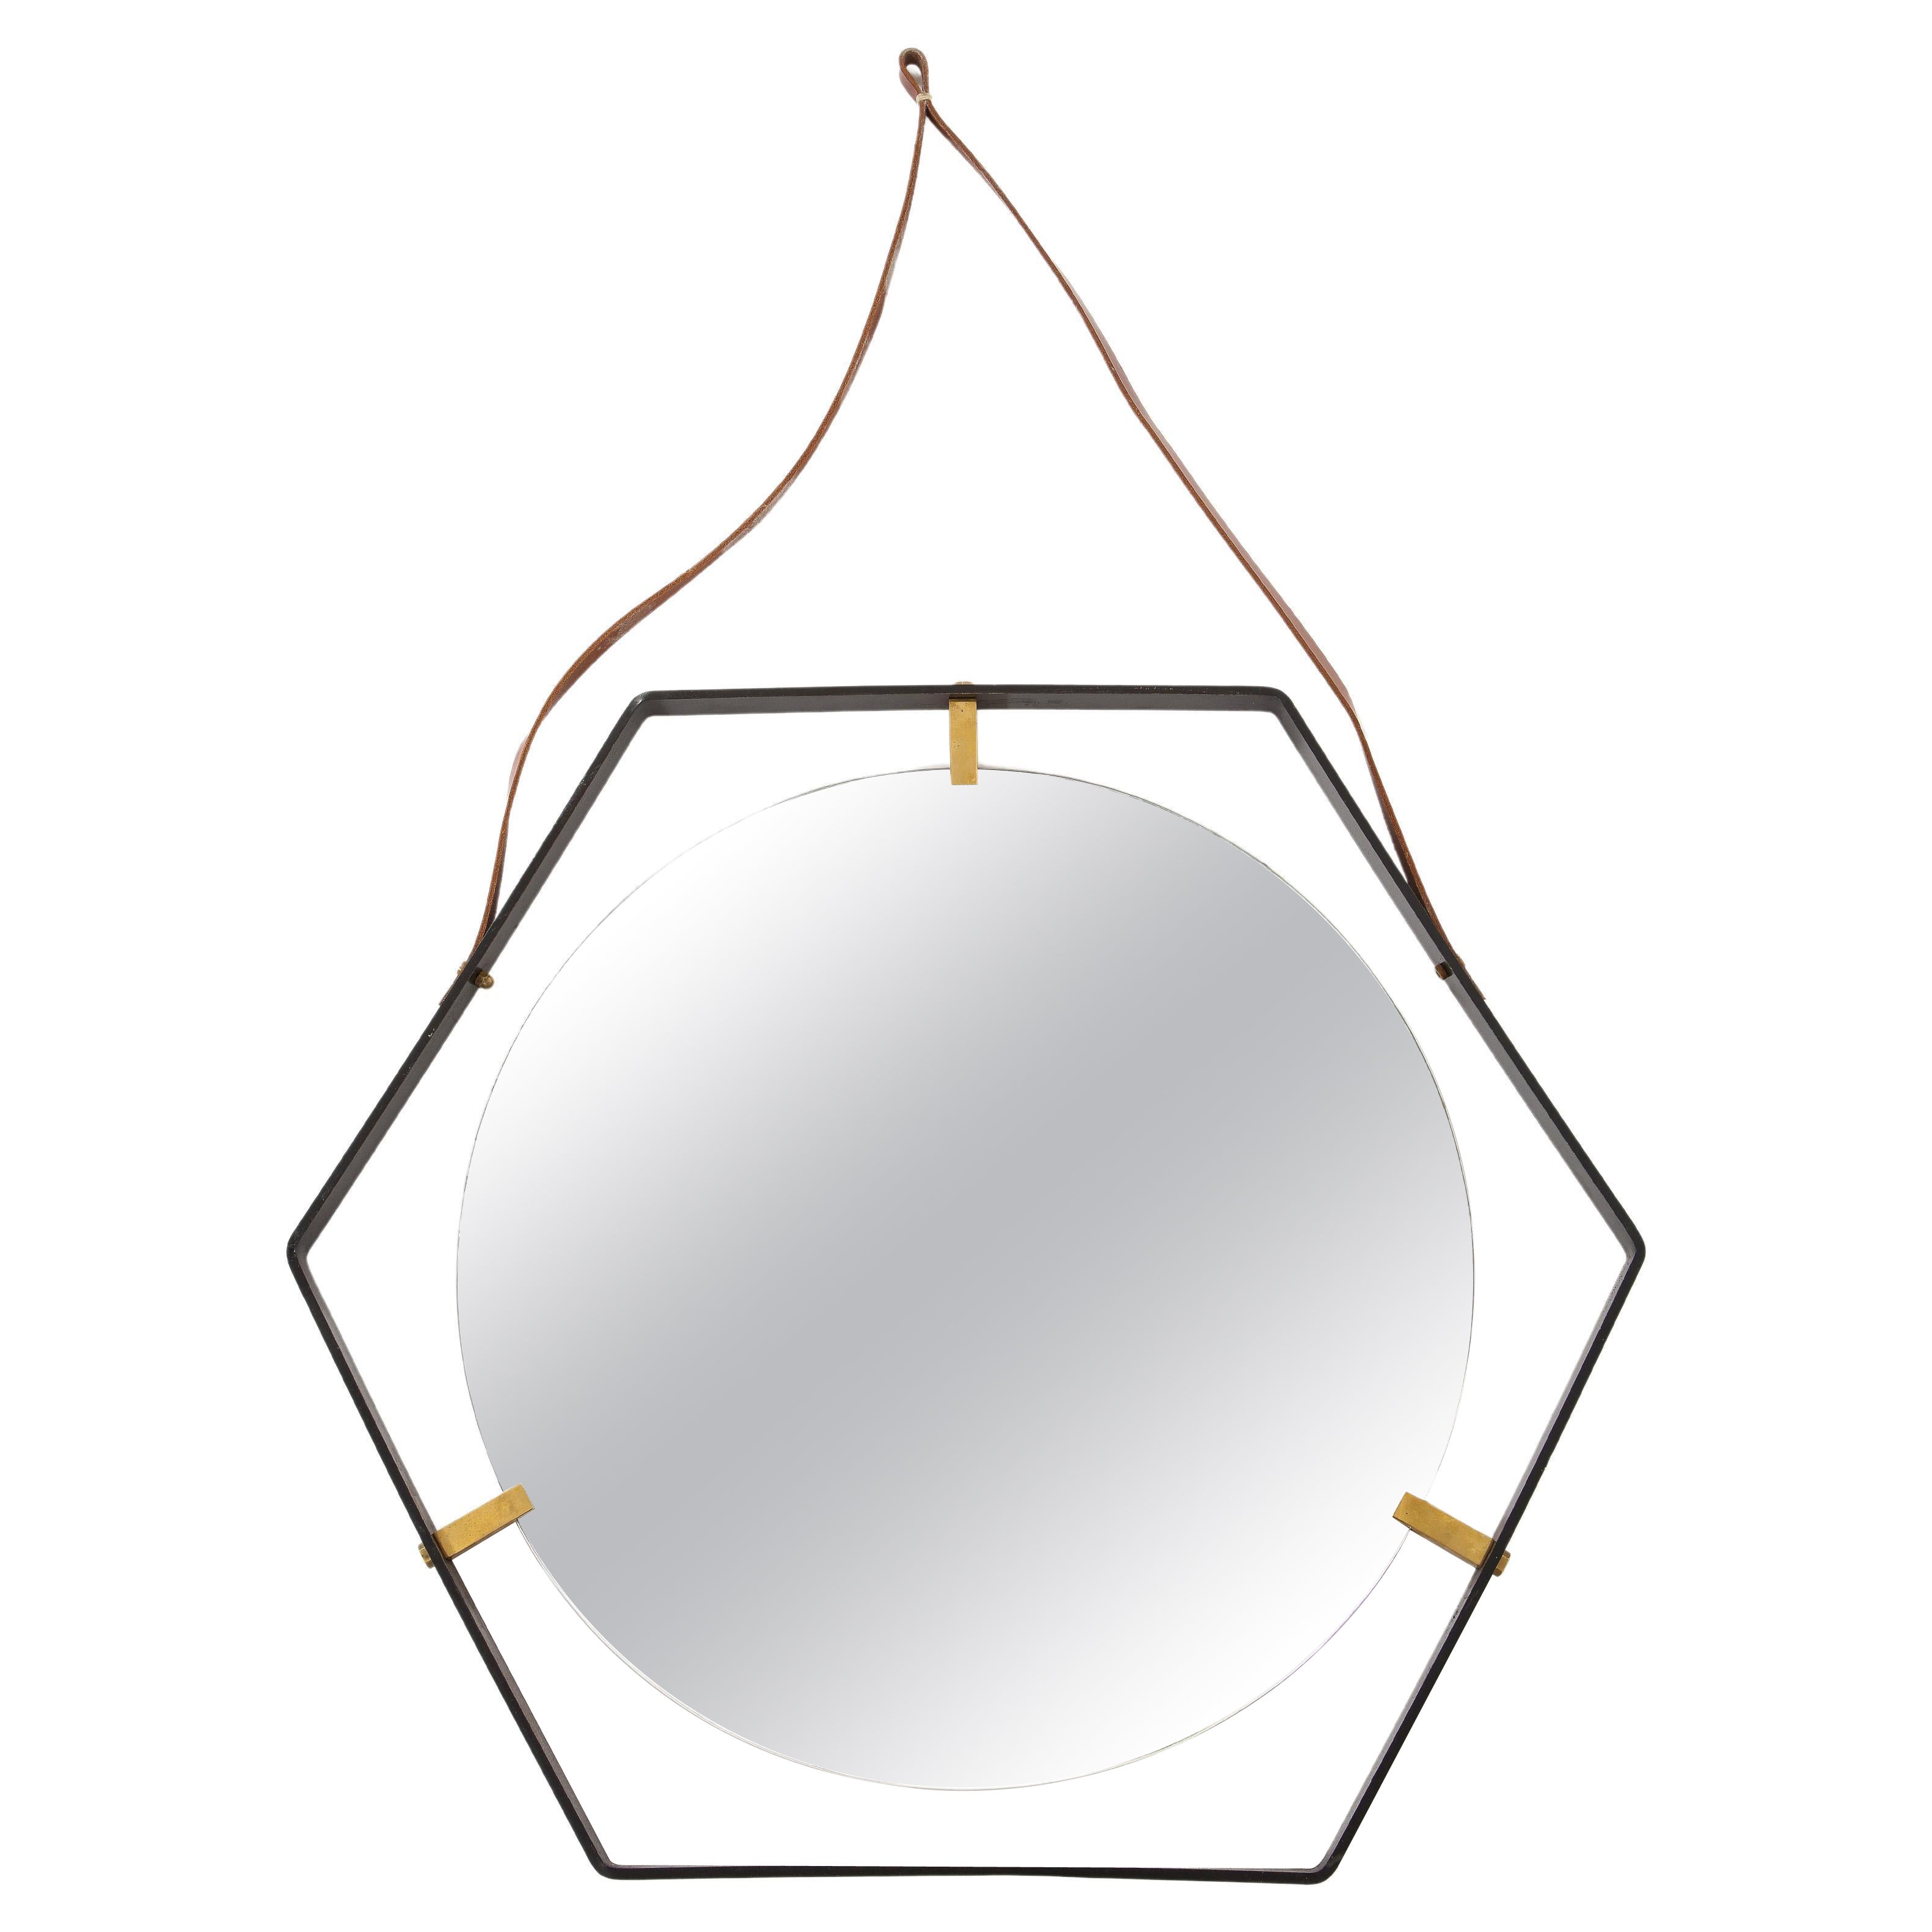 Octagonal Wrought Iron Mirror on Leather Strap, France 1960's